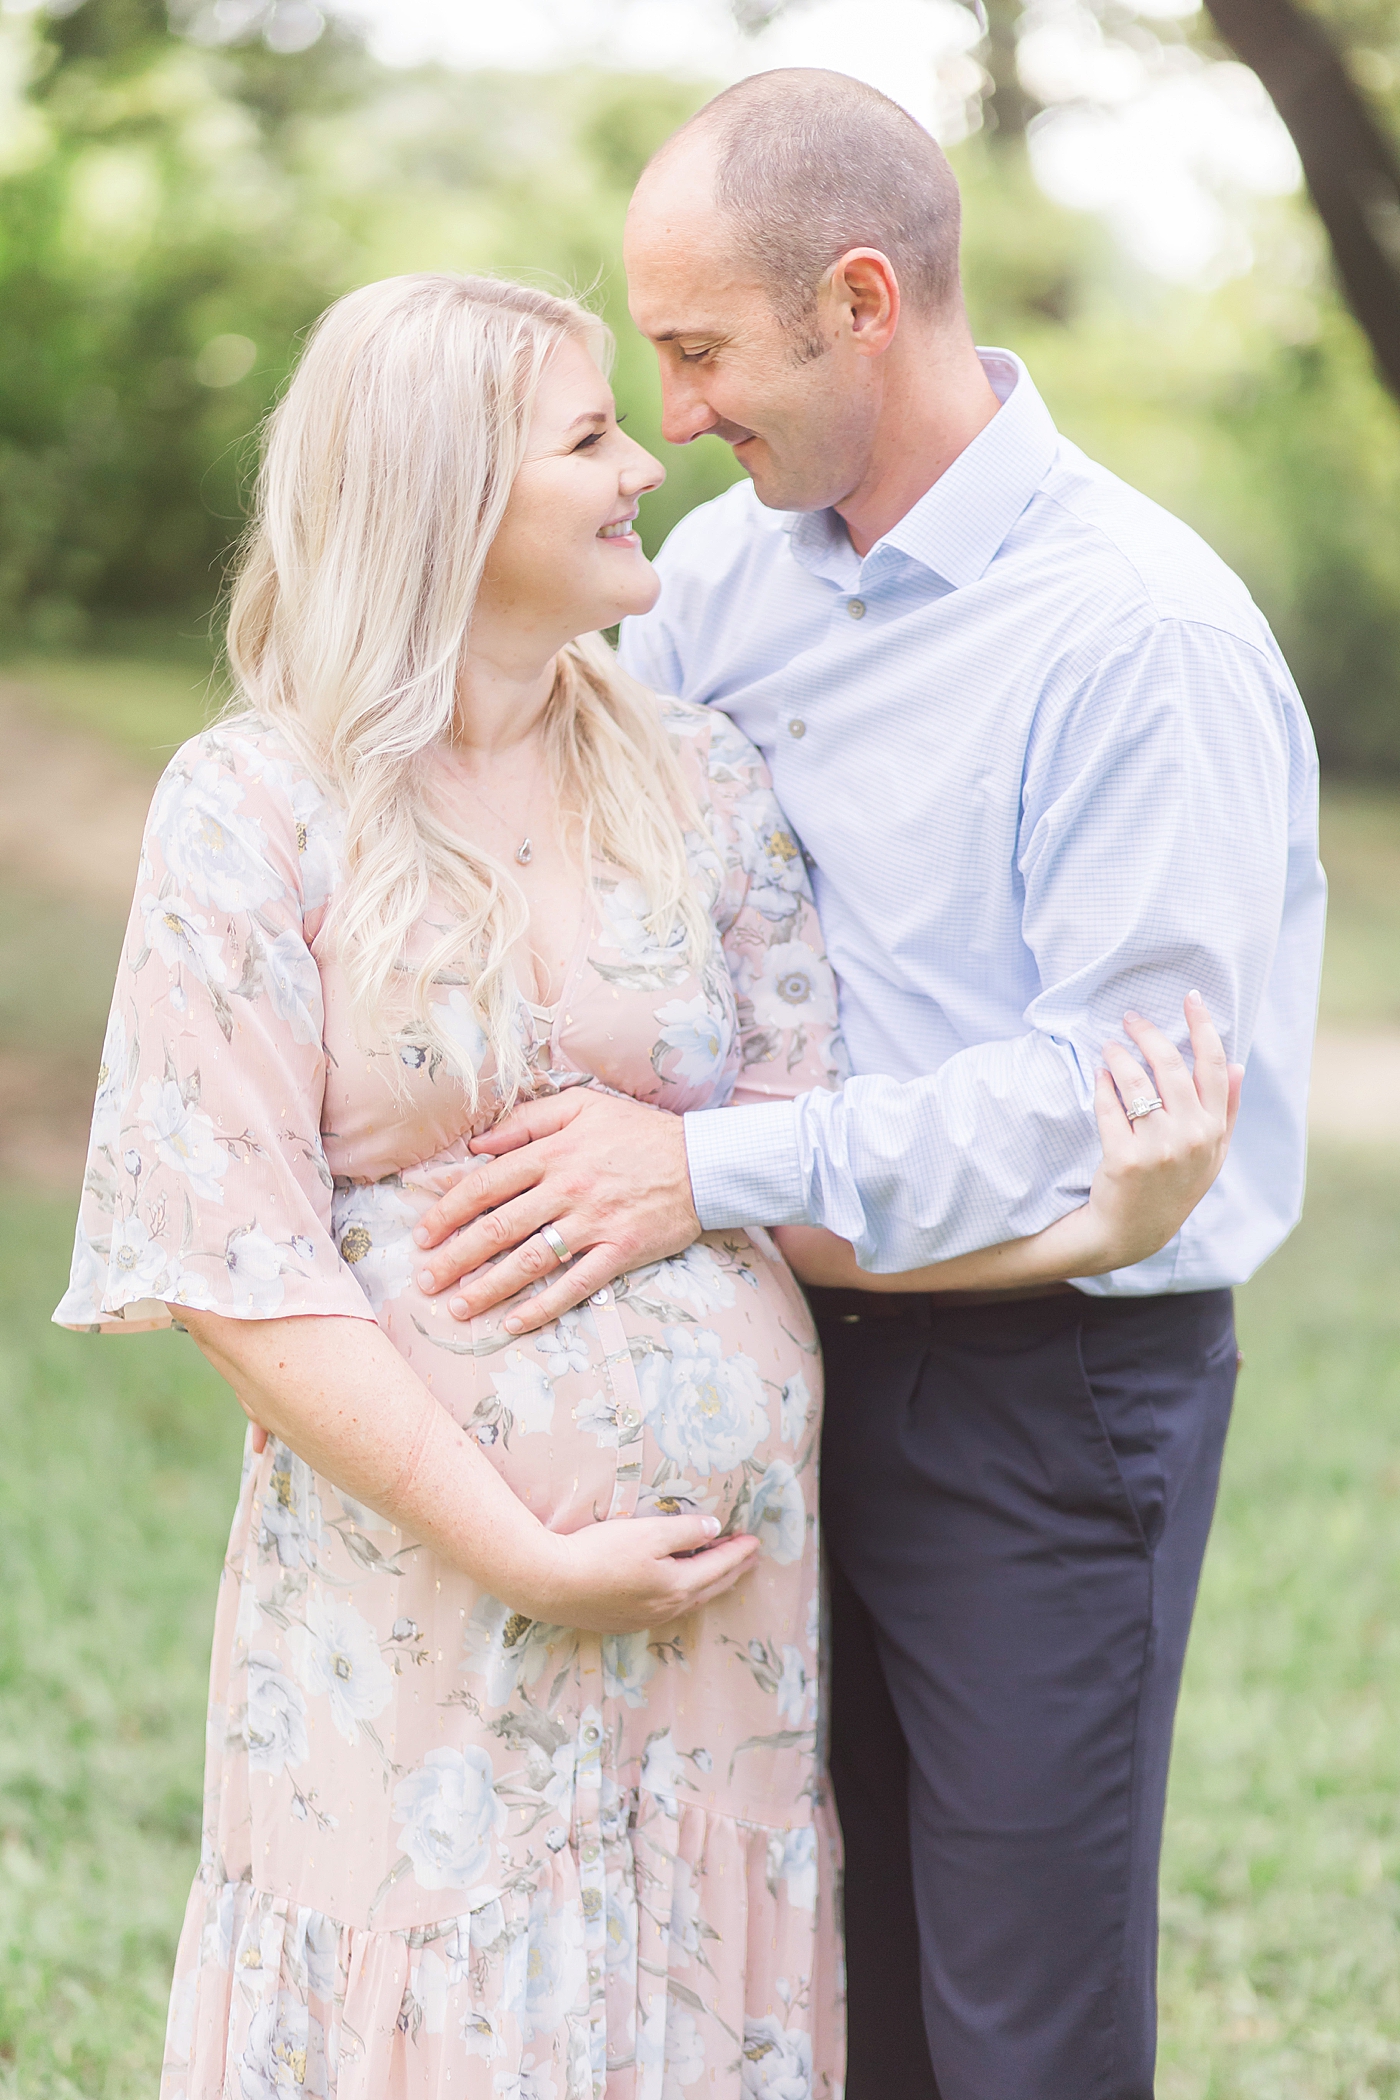 Mom and Dad embracing and looking at each other during maternity session with Fresh Light Photography.